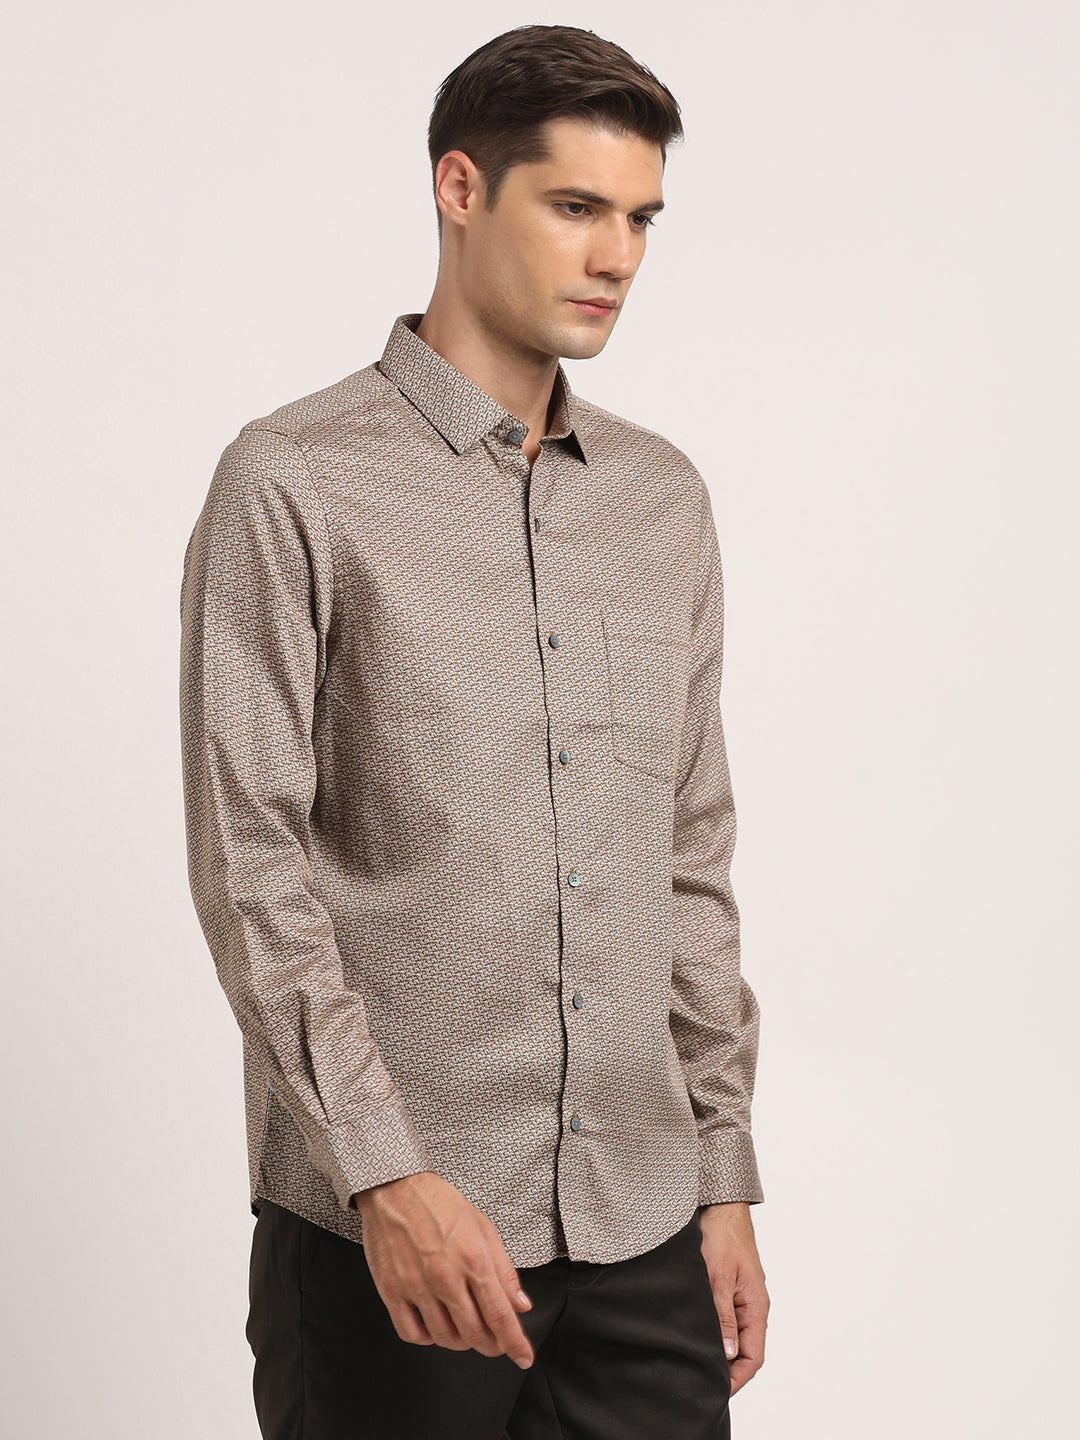 Cotton Stretch Brown Printed Slim Fit Full Sleeve Formal Shirt